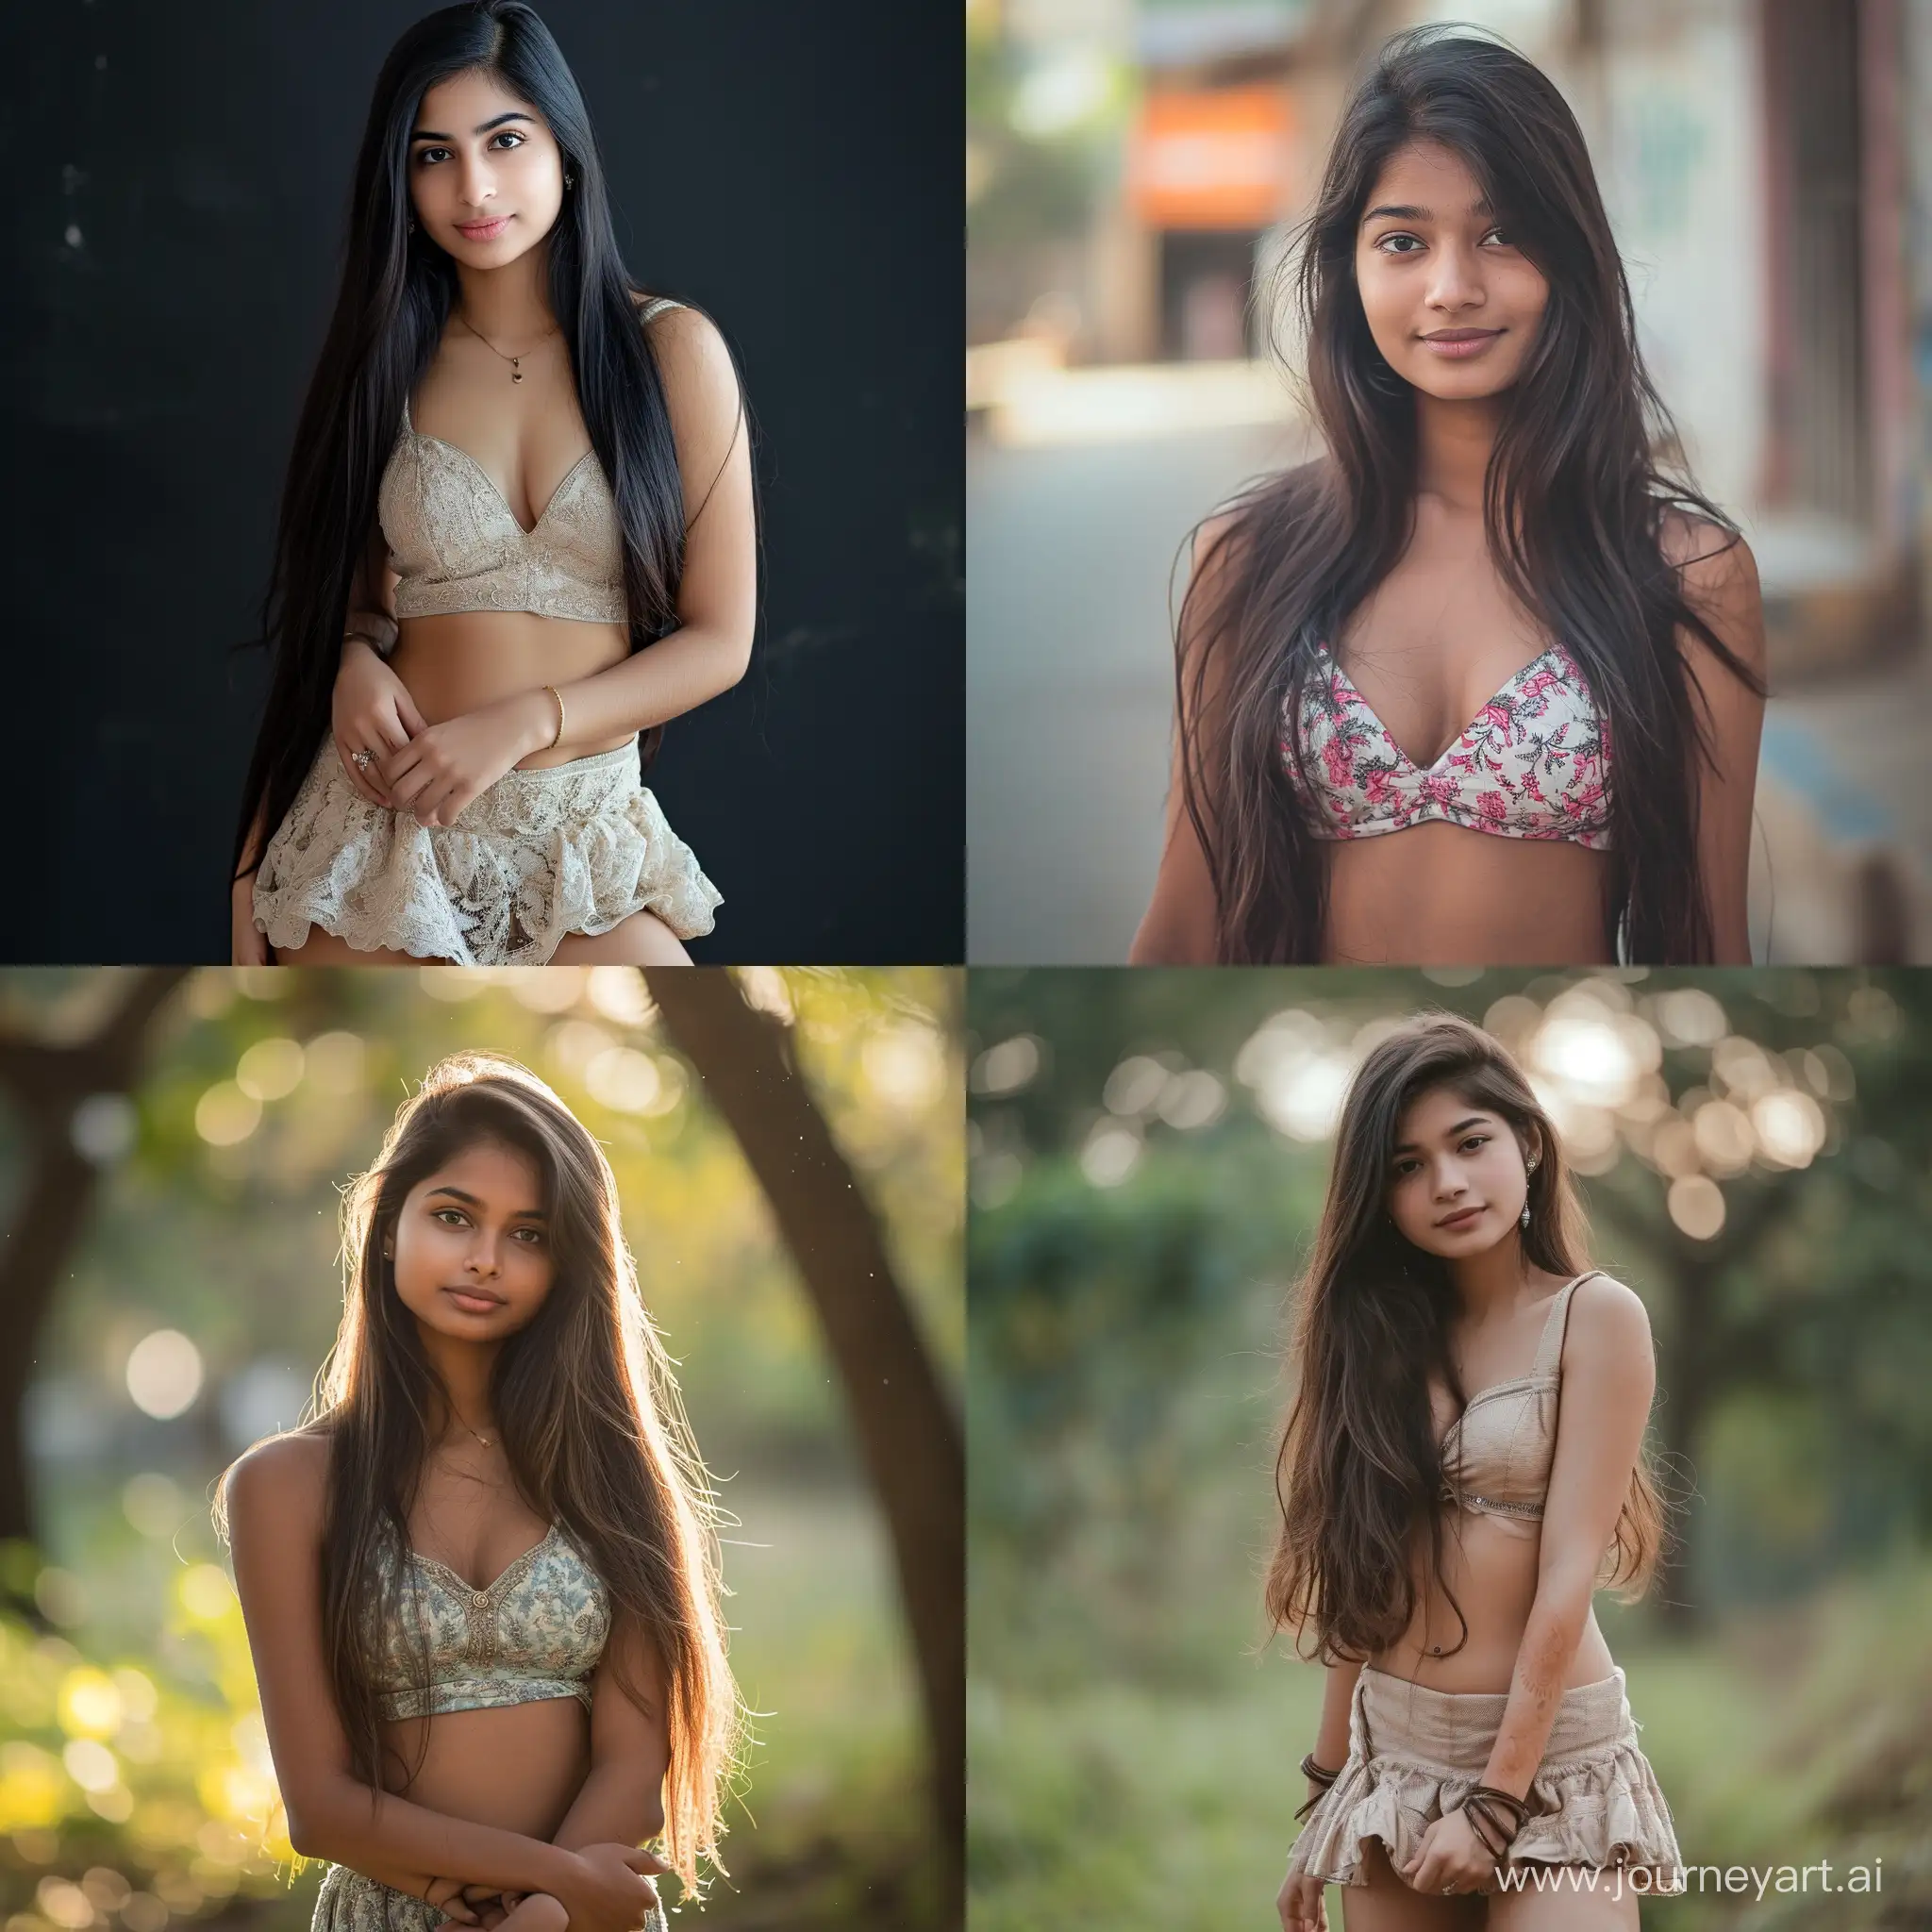 A beautiful Indian girl with long hair and fair complexion in short dress pear shaped body aged 21